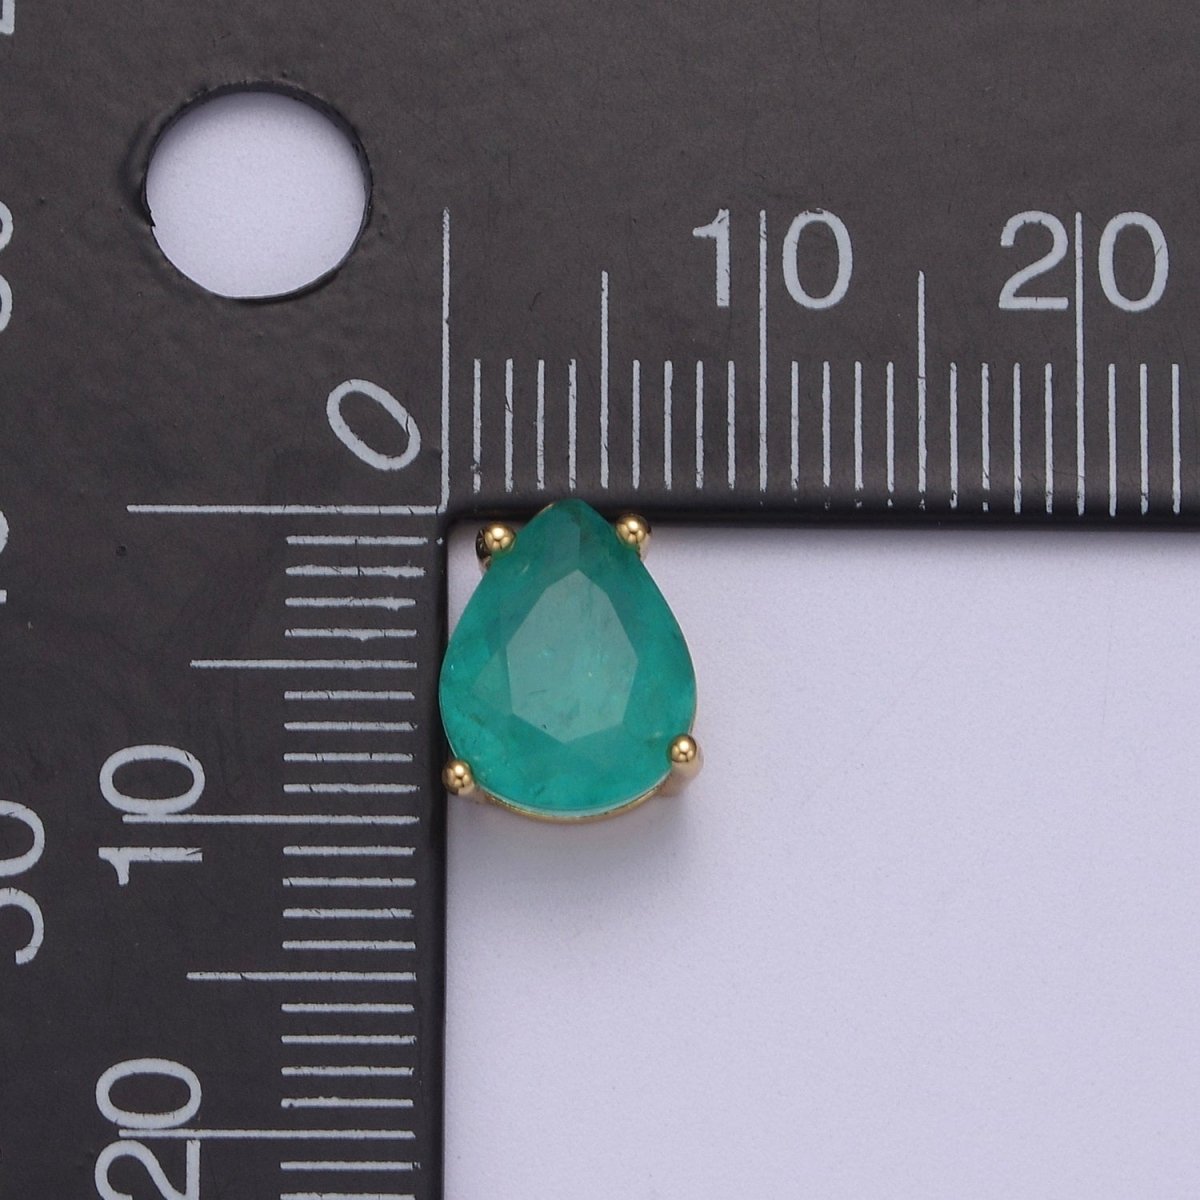 Green Aqua Cubic Zirconia Tear Drop Beads - 10mm Small Beautiful Bright 3D Teardrop Jewelry Gold Beads spacer for Bracelet Necklace Supply B-463 - DLUXCA